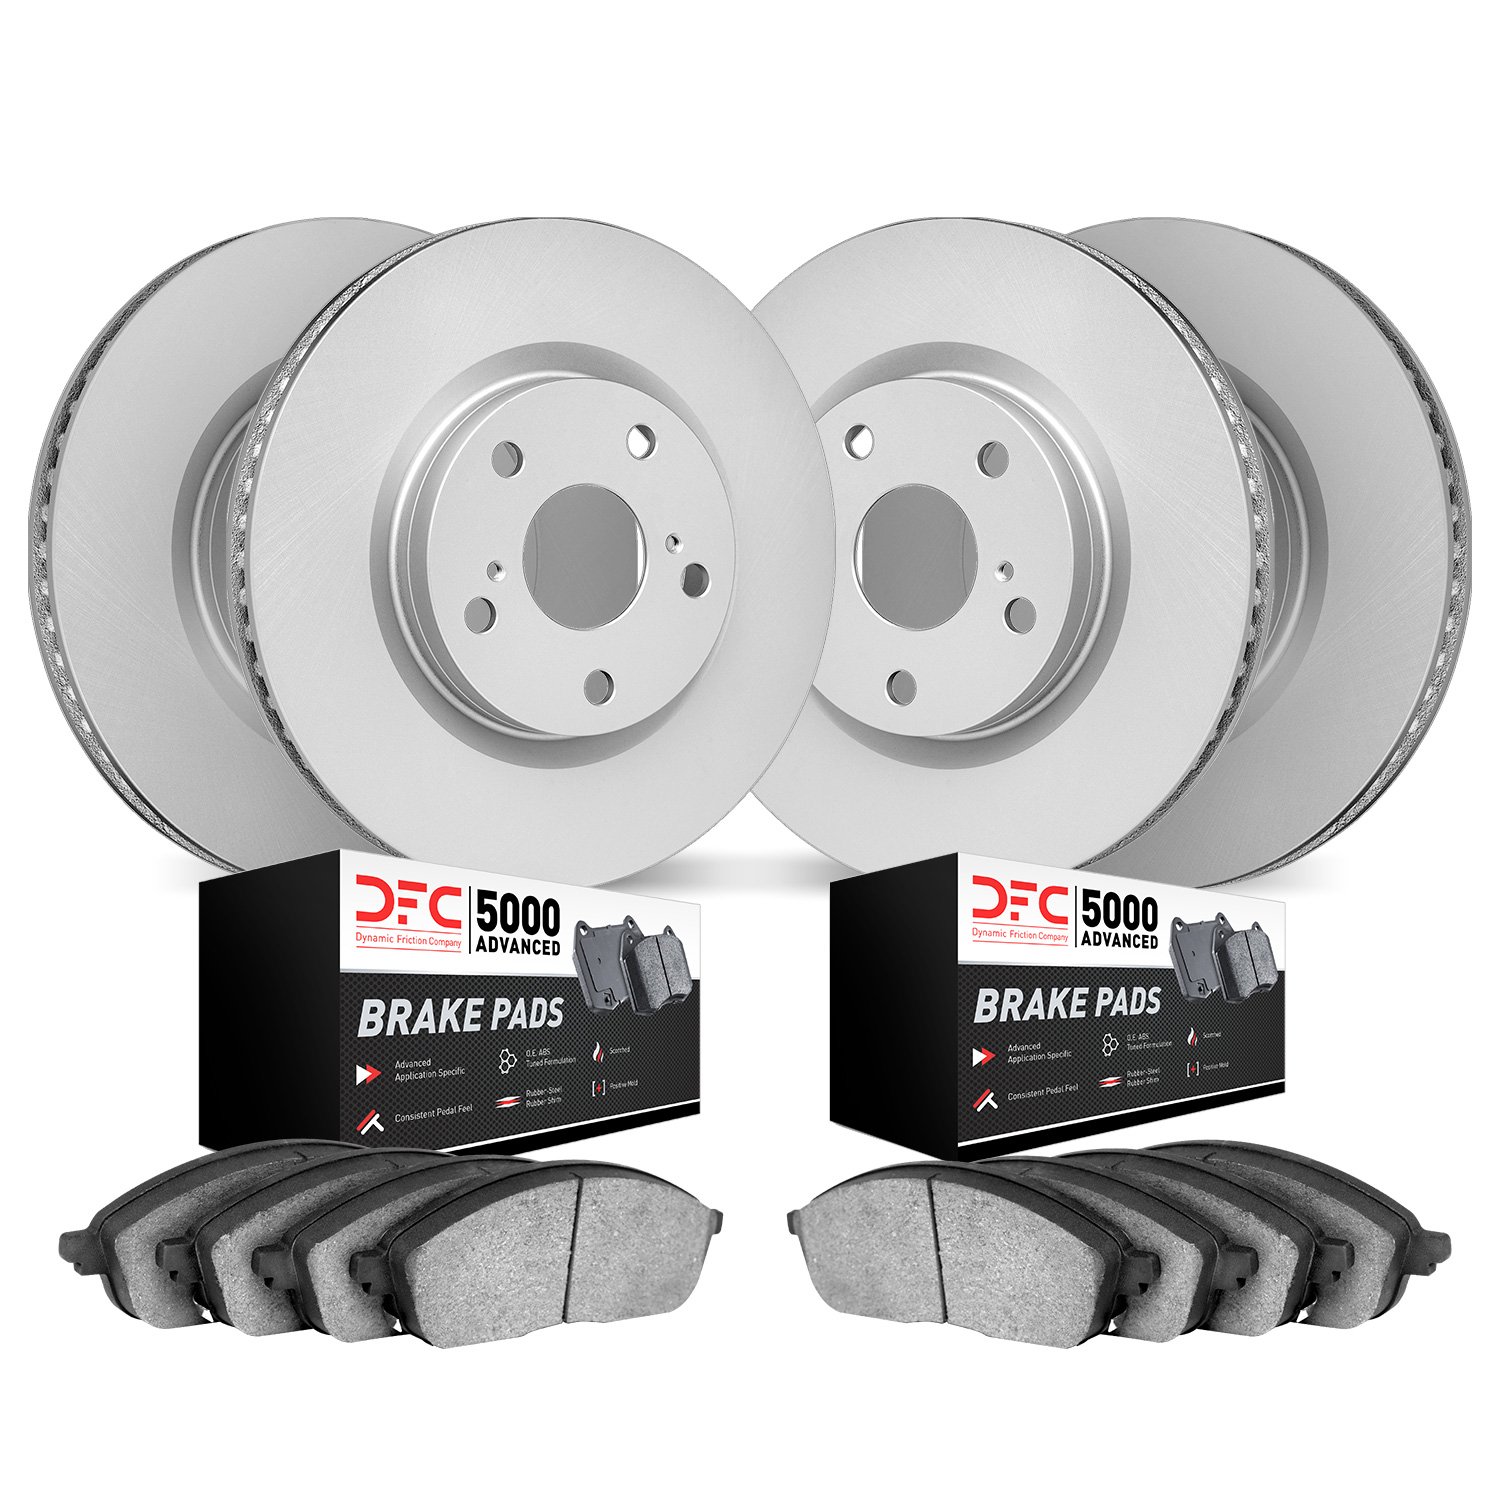 4504-46019 Geospec Brake Rotors w/5000 Advanced Brake Pads Kit, 2009-2011 GM, Position: Front and Rear